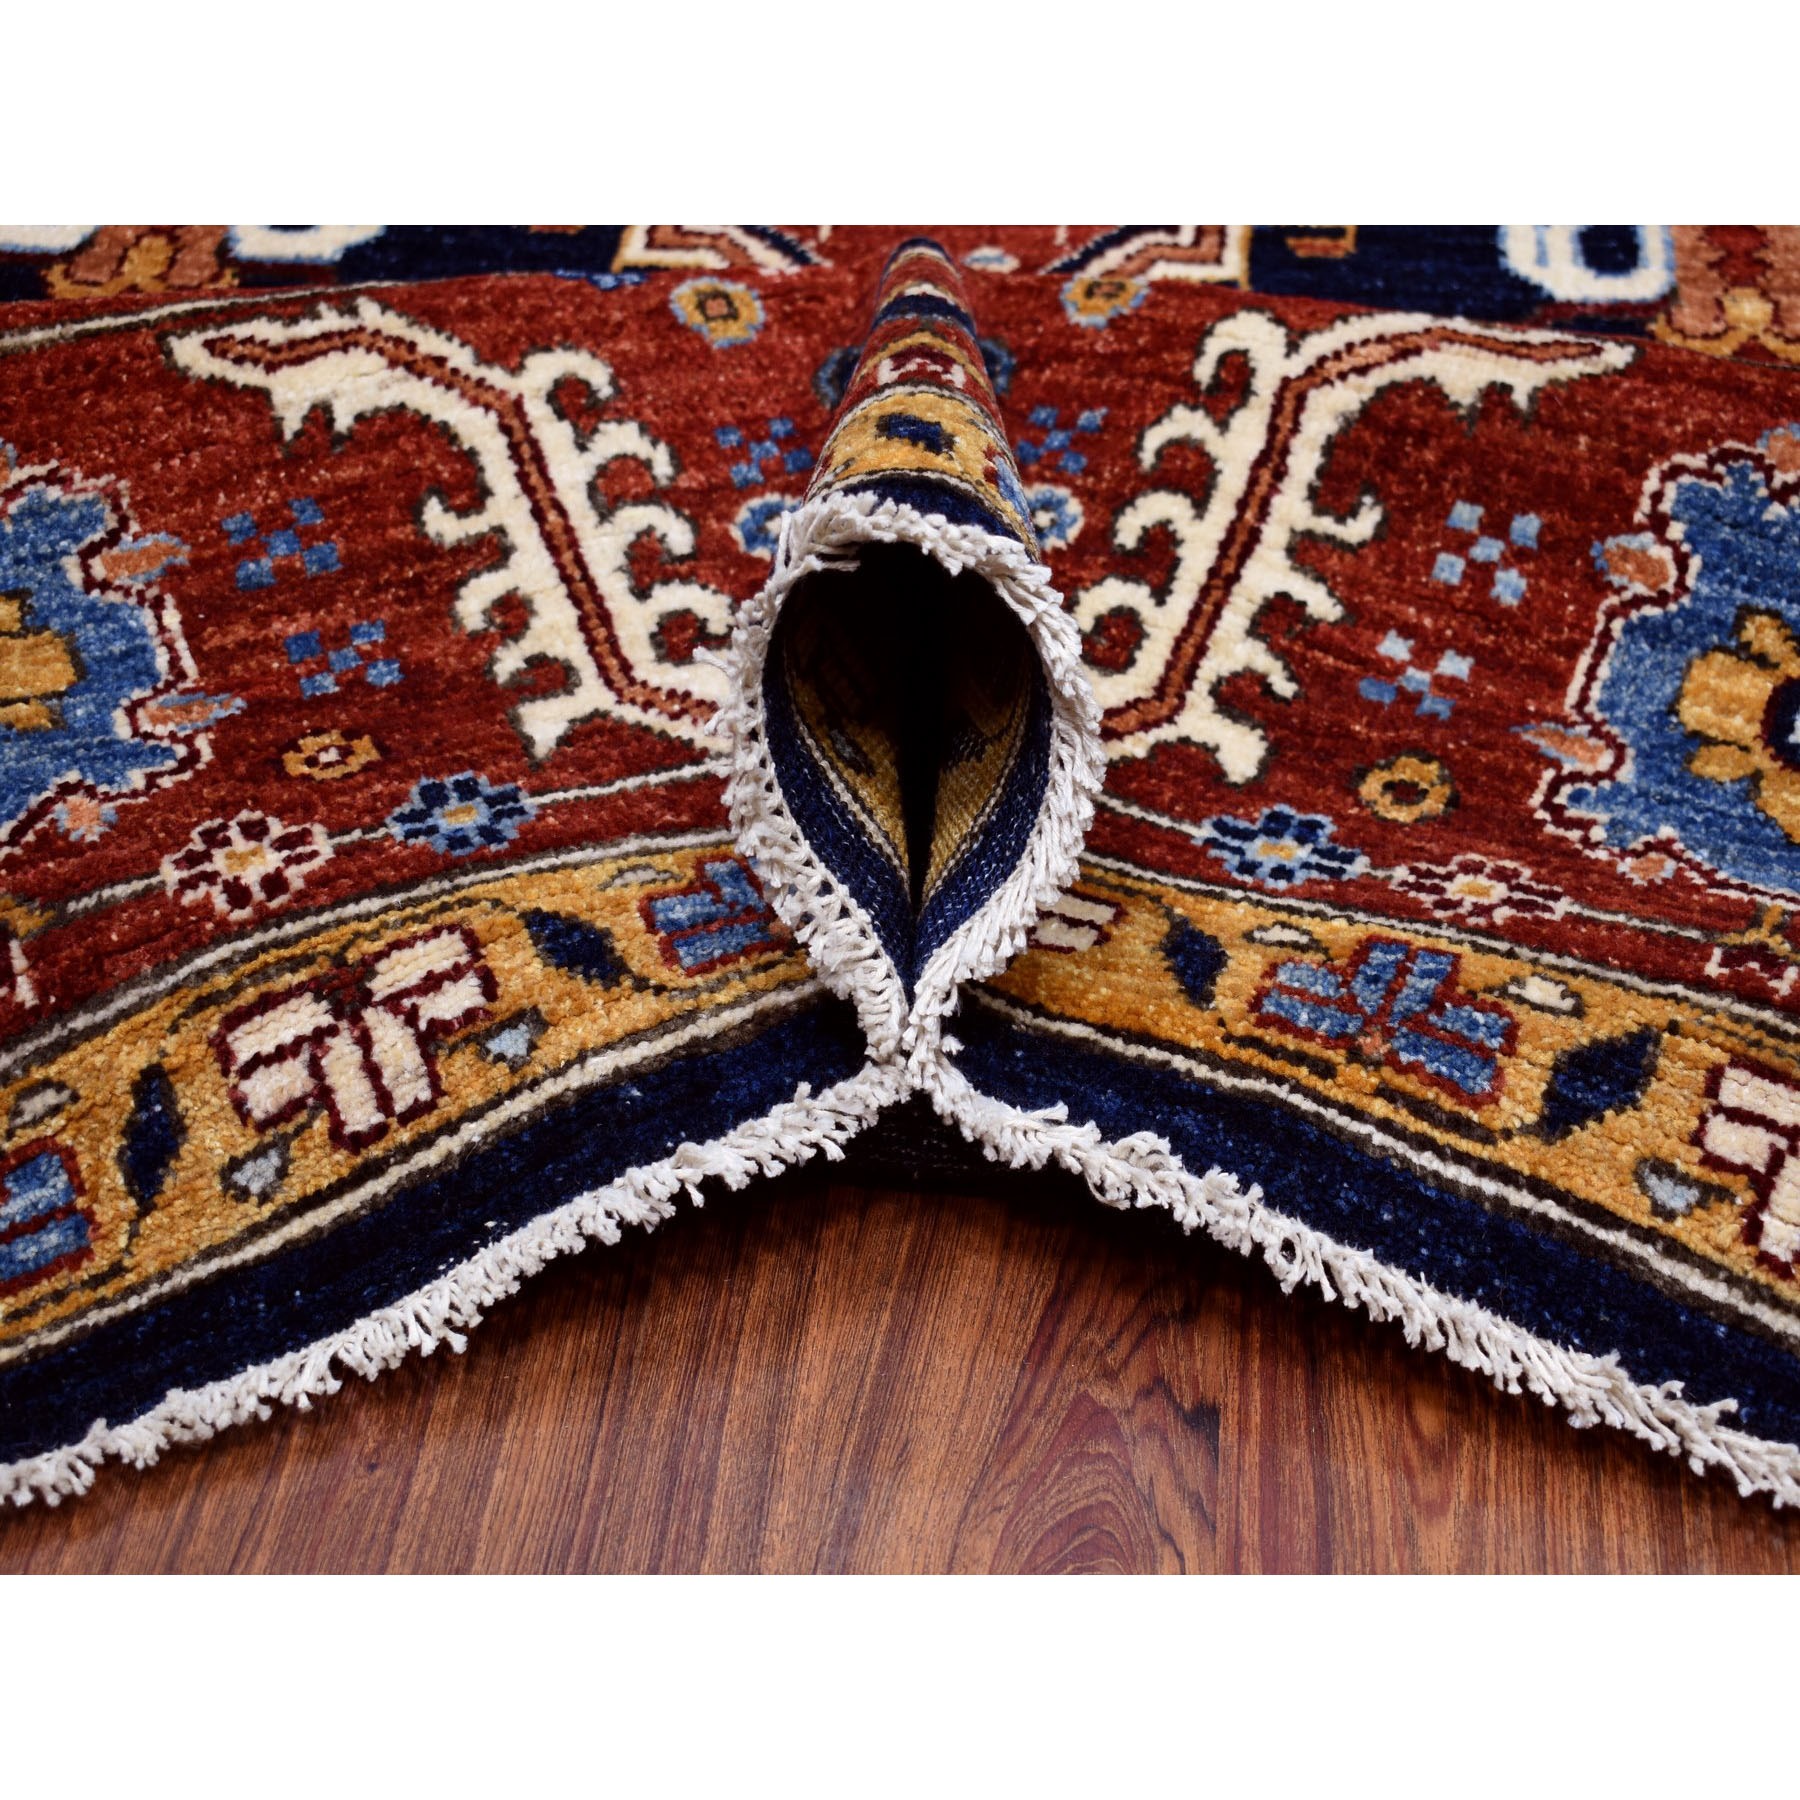 9-x11-9  Blue Peshawar With Heriz Design Hand Knotted Pure Wool Oriental Rug 